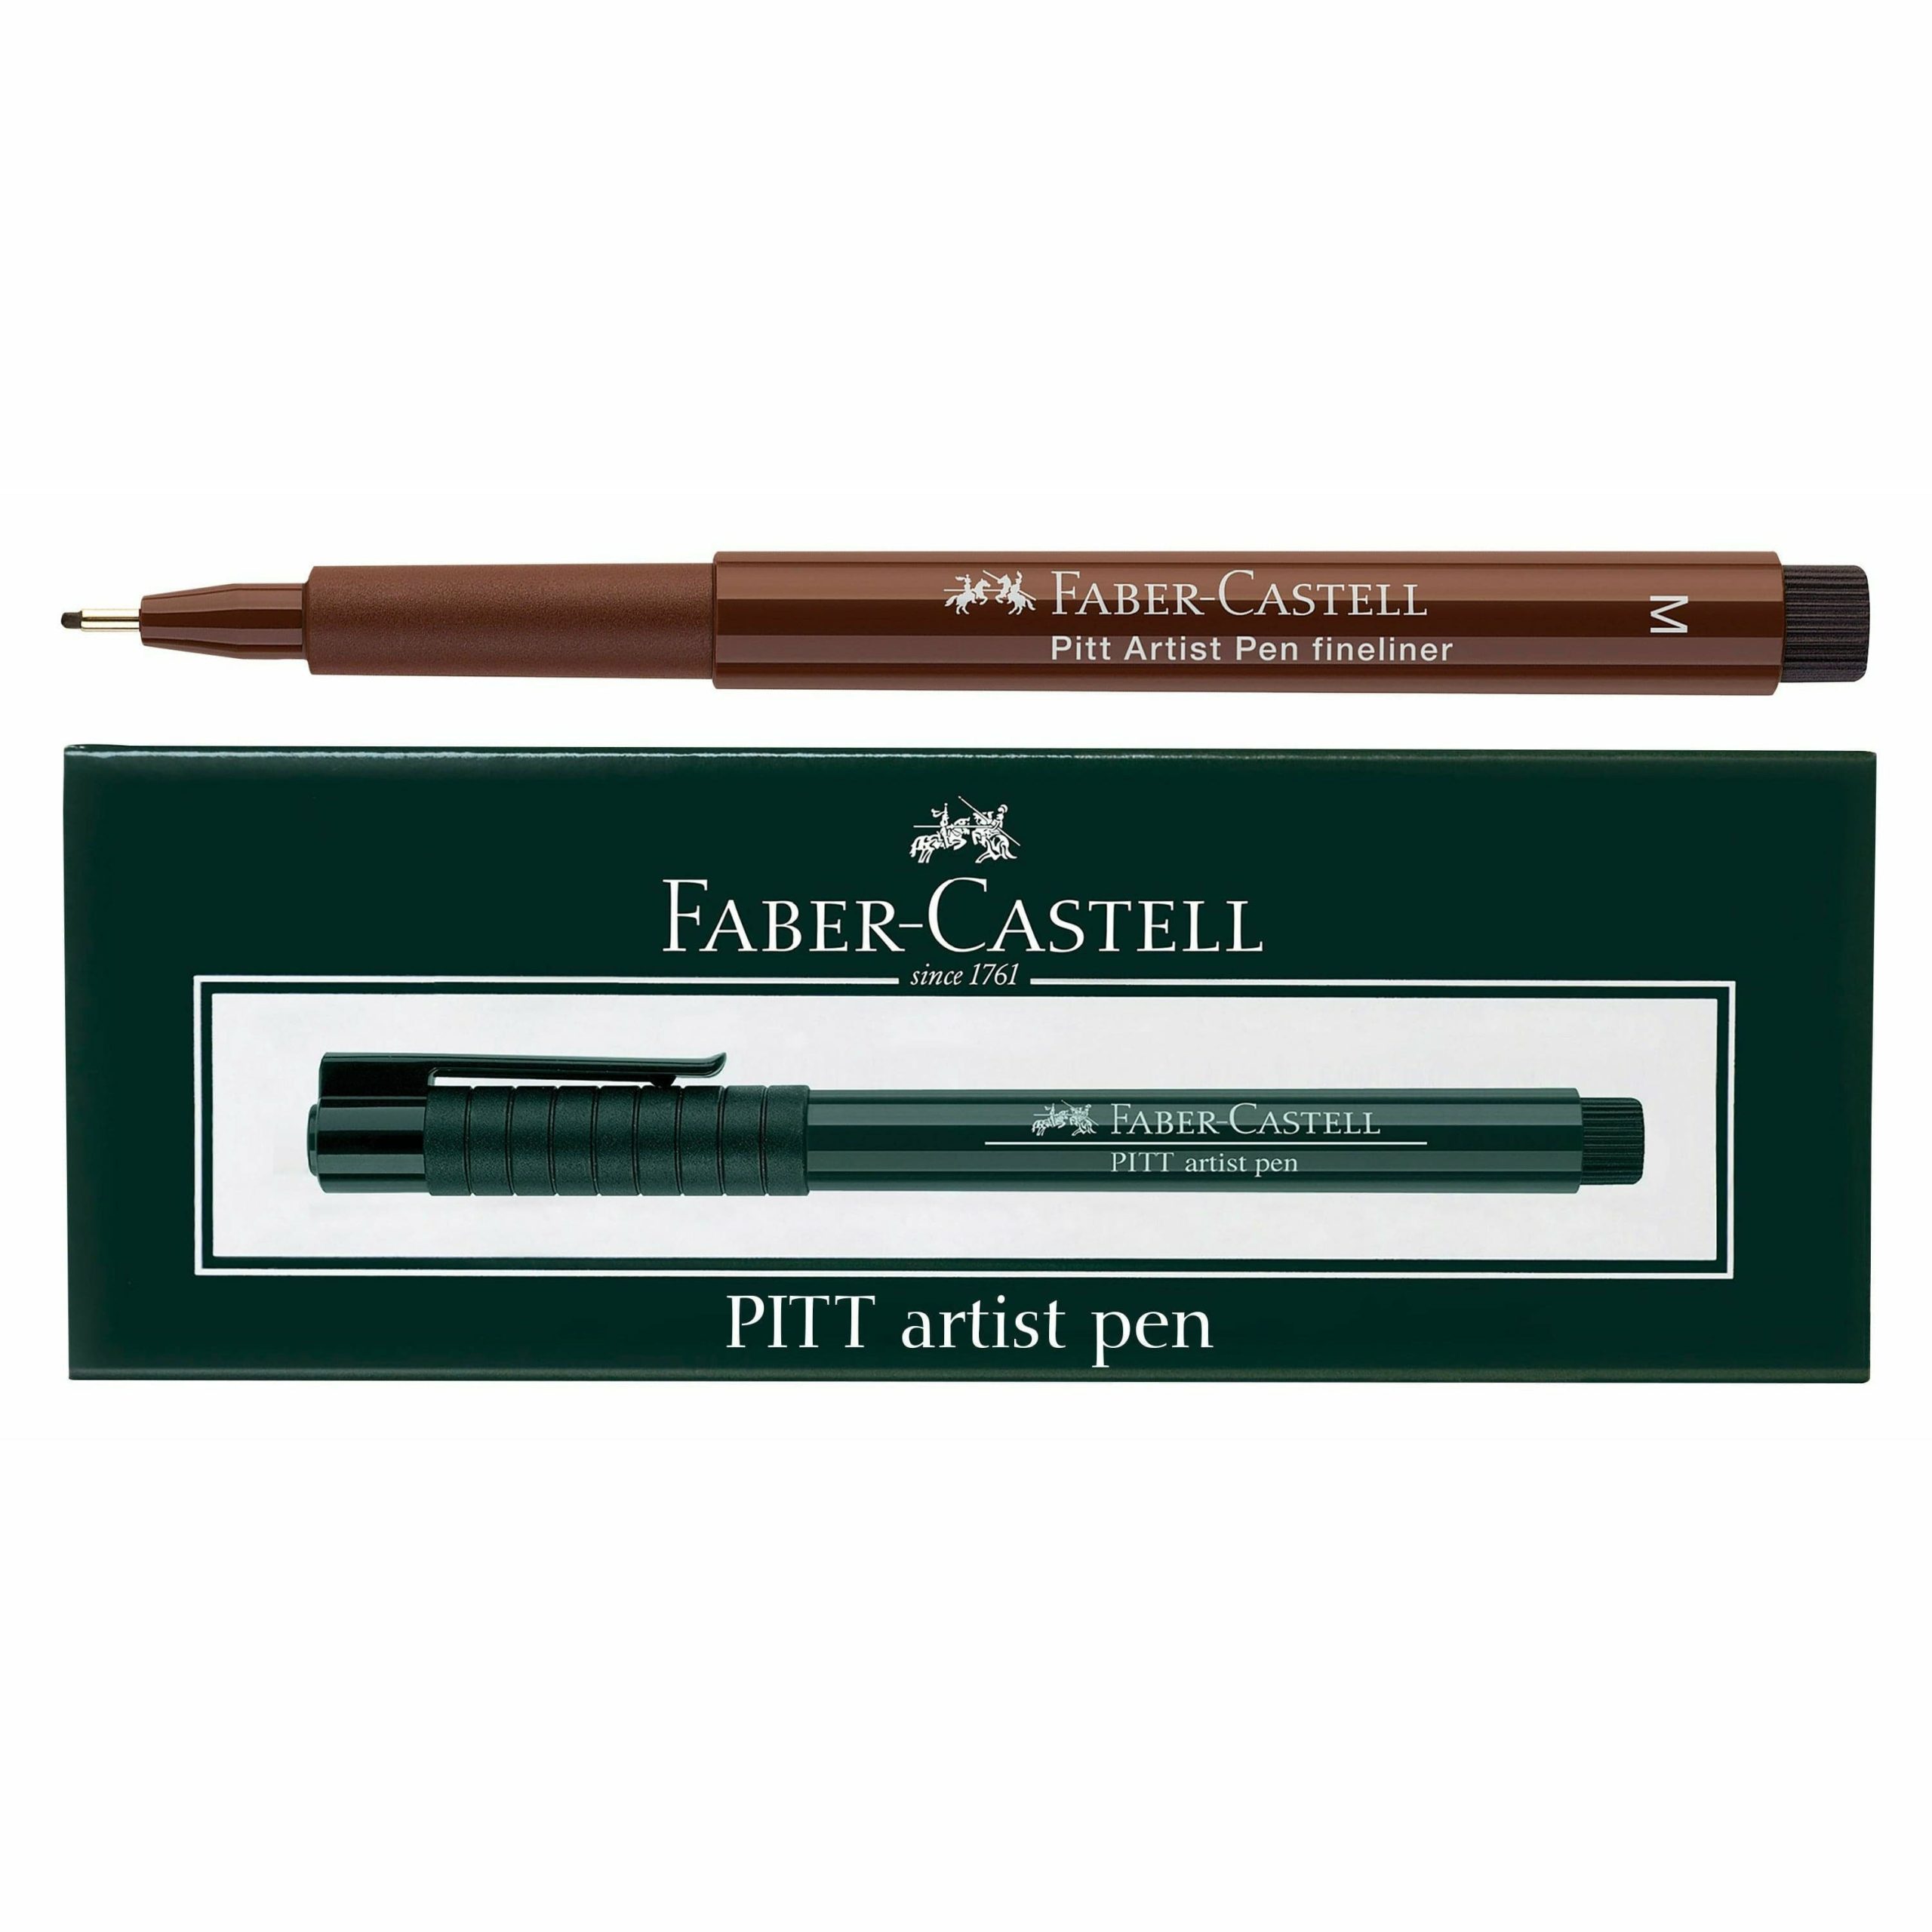 https://www.shopriot.shop/wp-content/uploads/1689/10/find-your-faber-castell-pitt-artist-fineliner-pen-m-0-7mm-175-dark-sepia-159-wide-variety-is-available_5-scaled.jpg